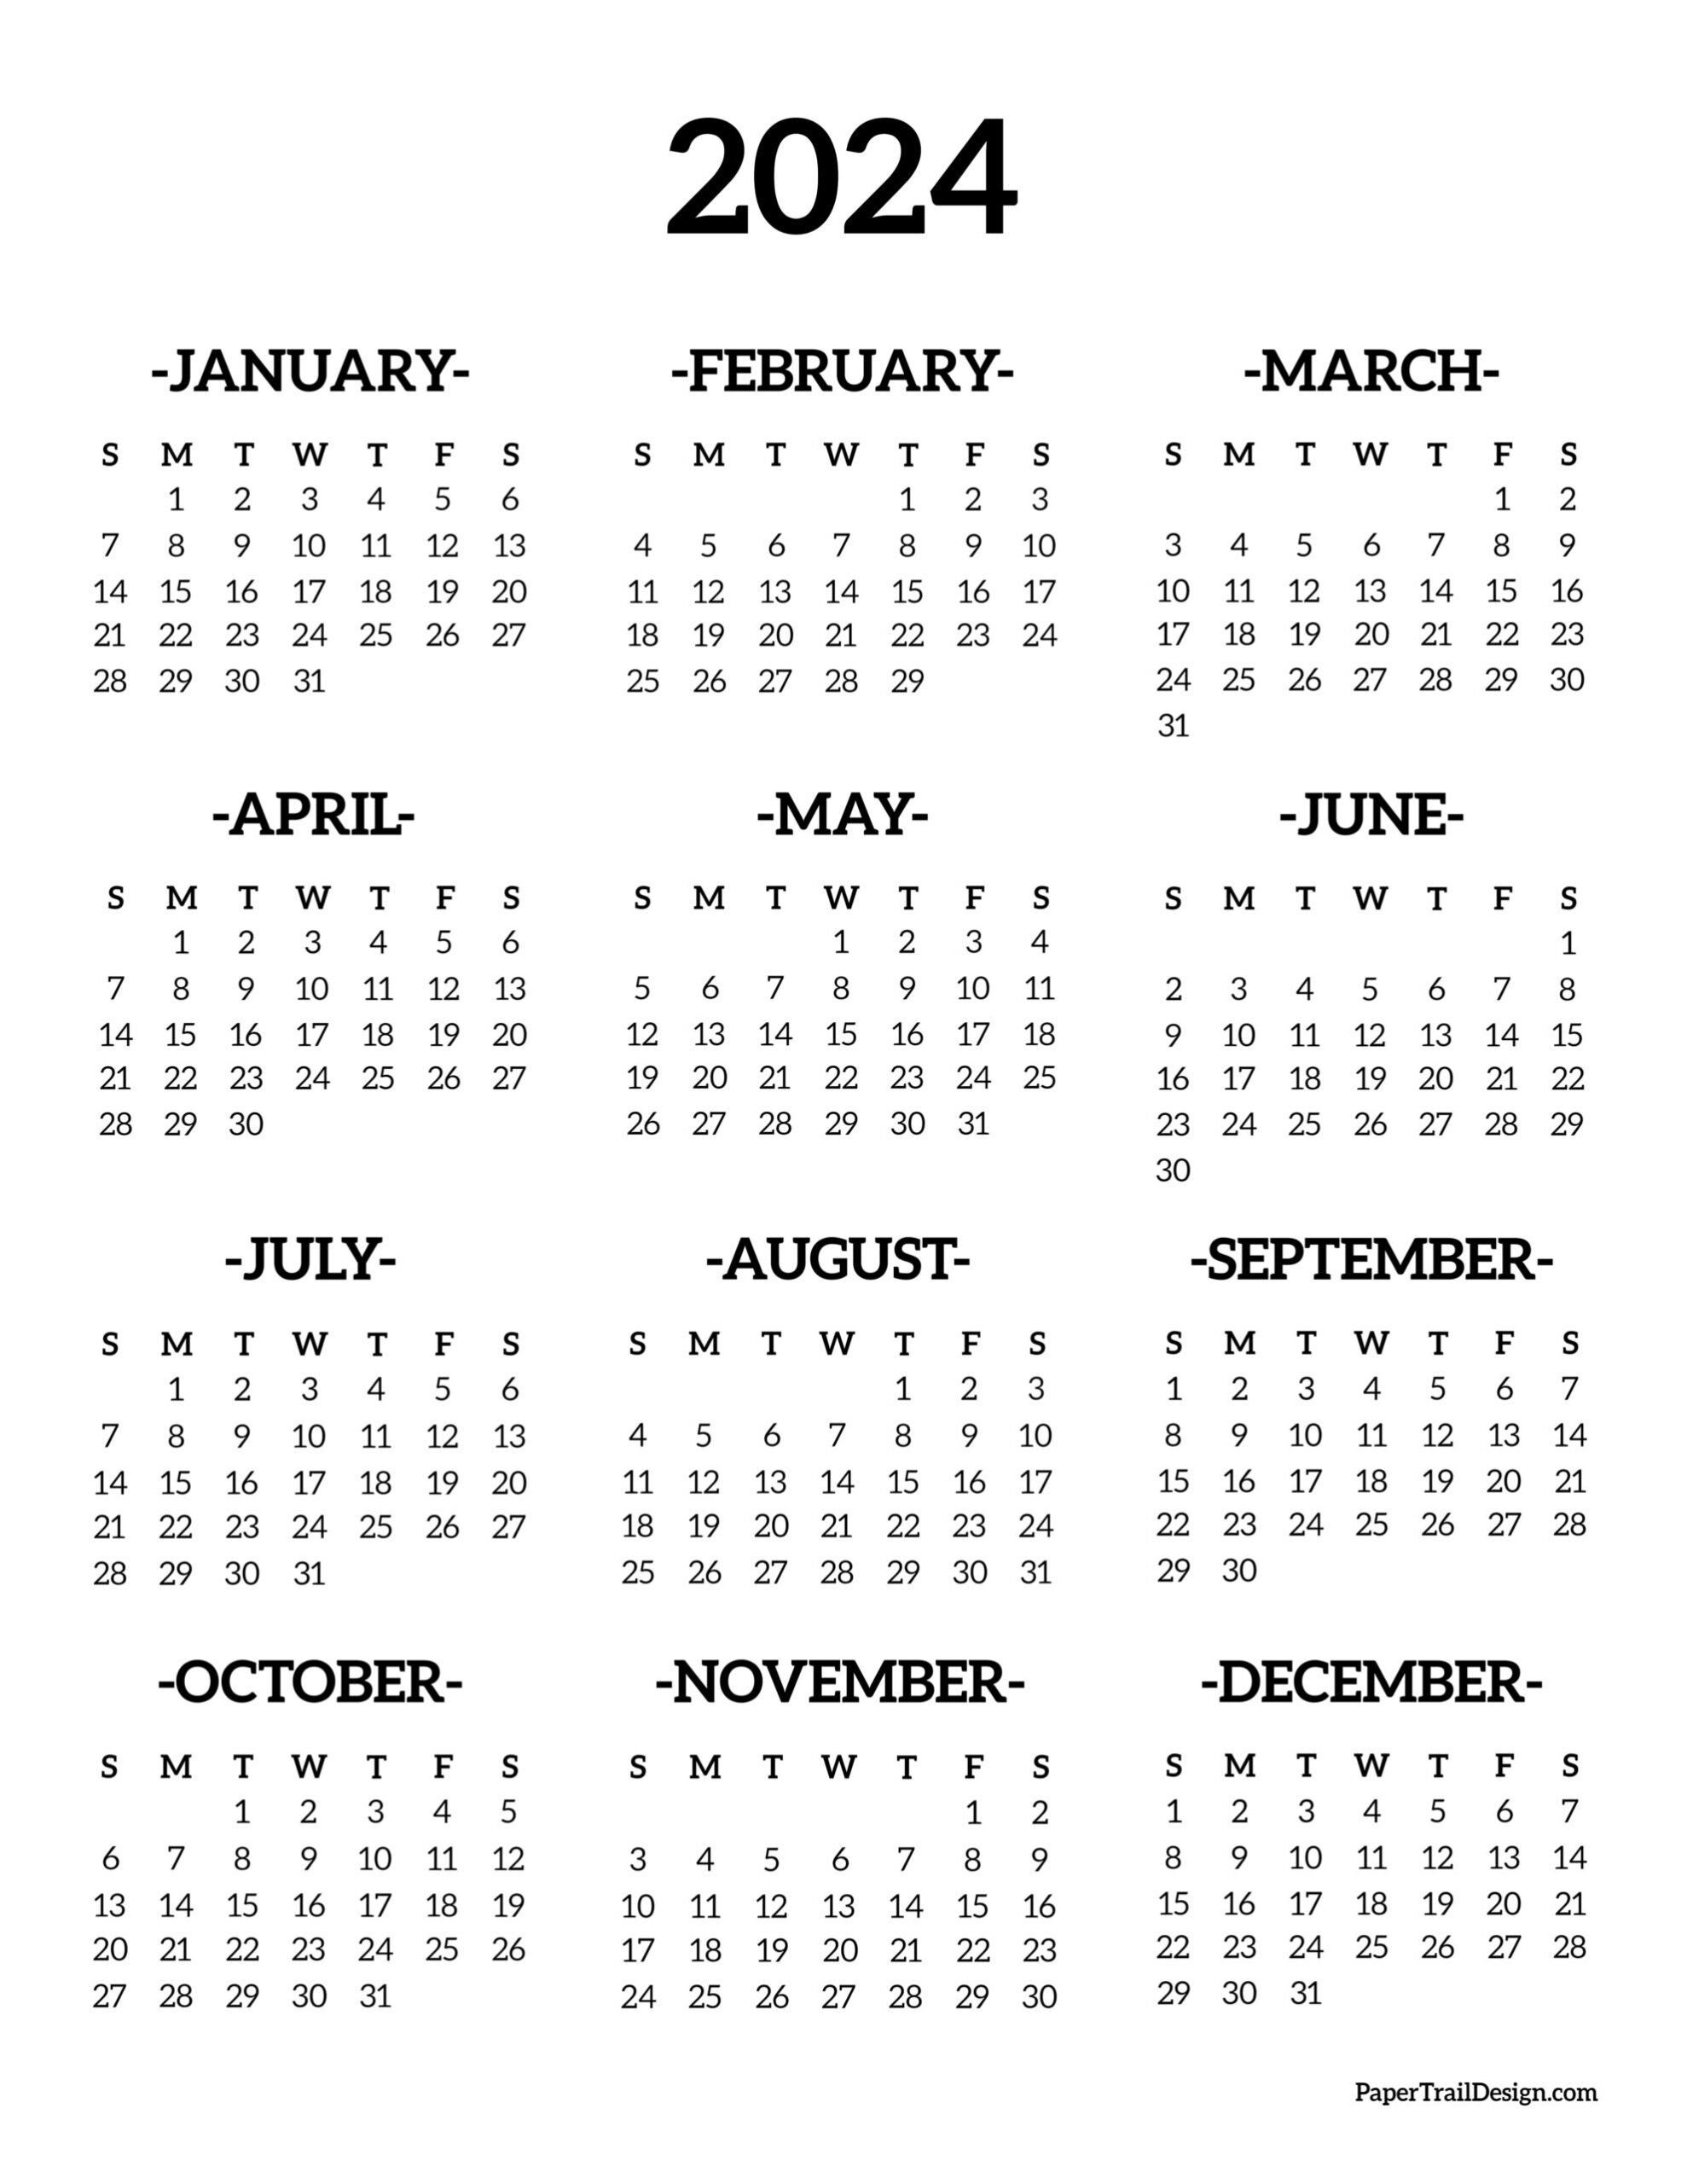 Calendar 2024 Printable One Page - Paper Trail Design for 2024 Annual Calendar Free Printable